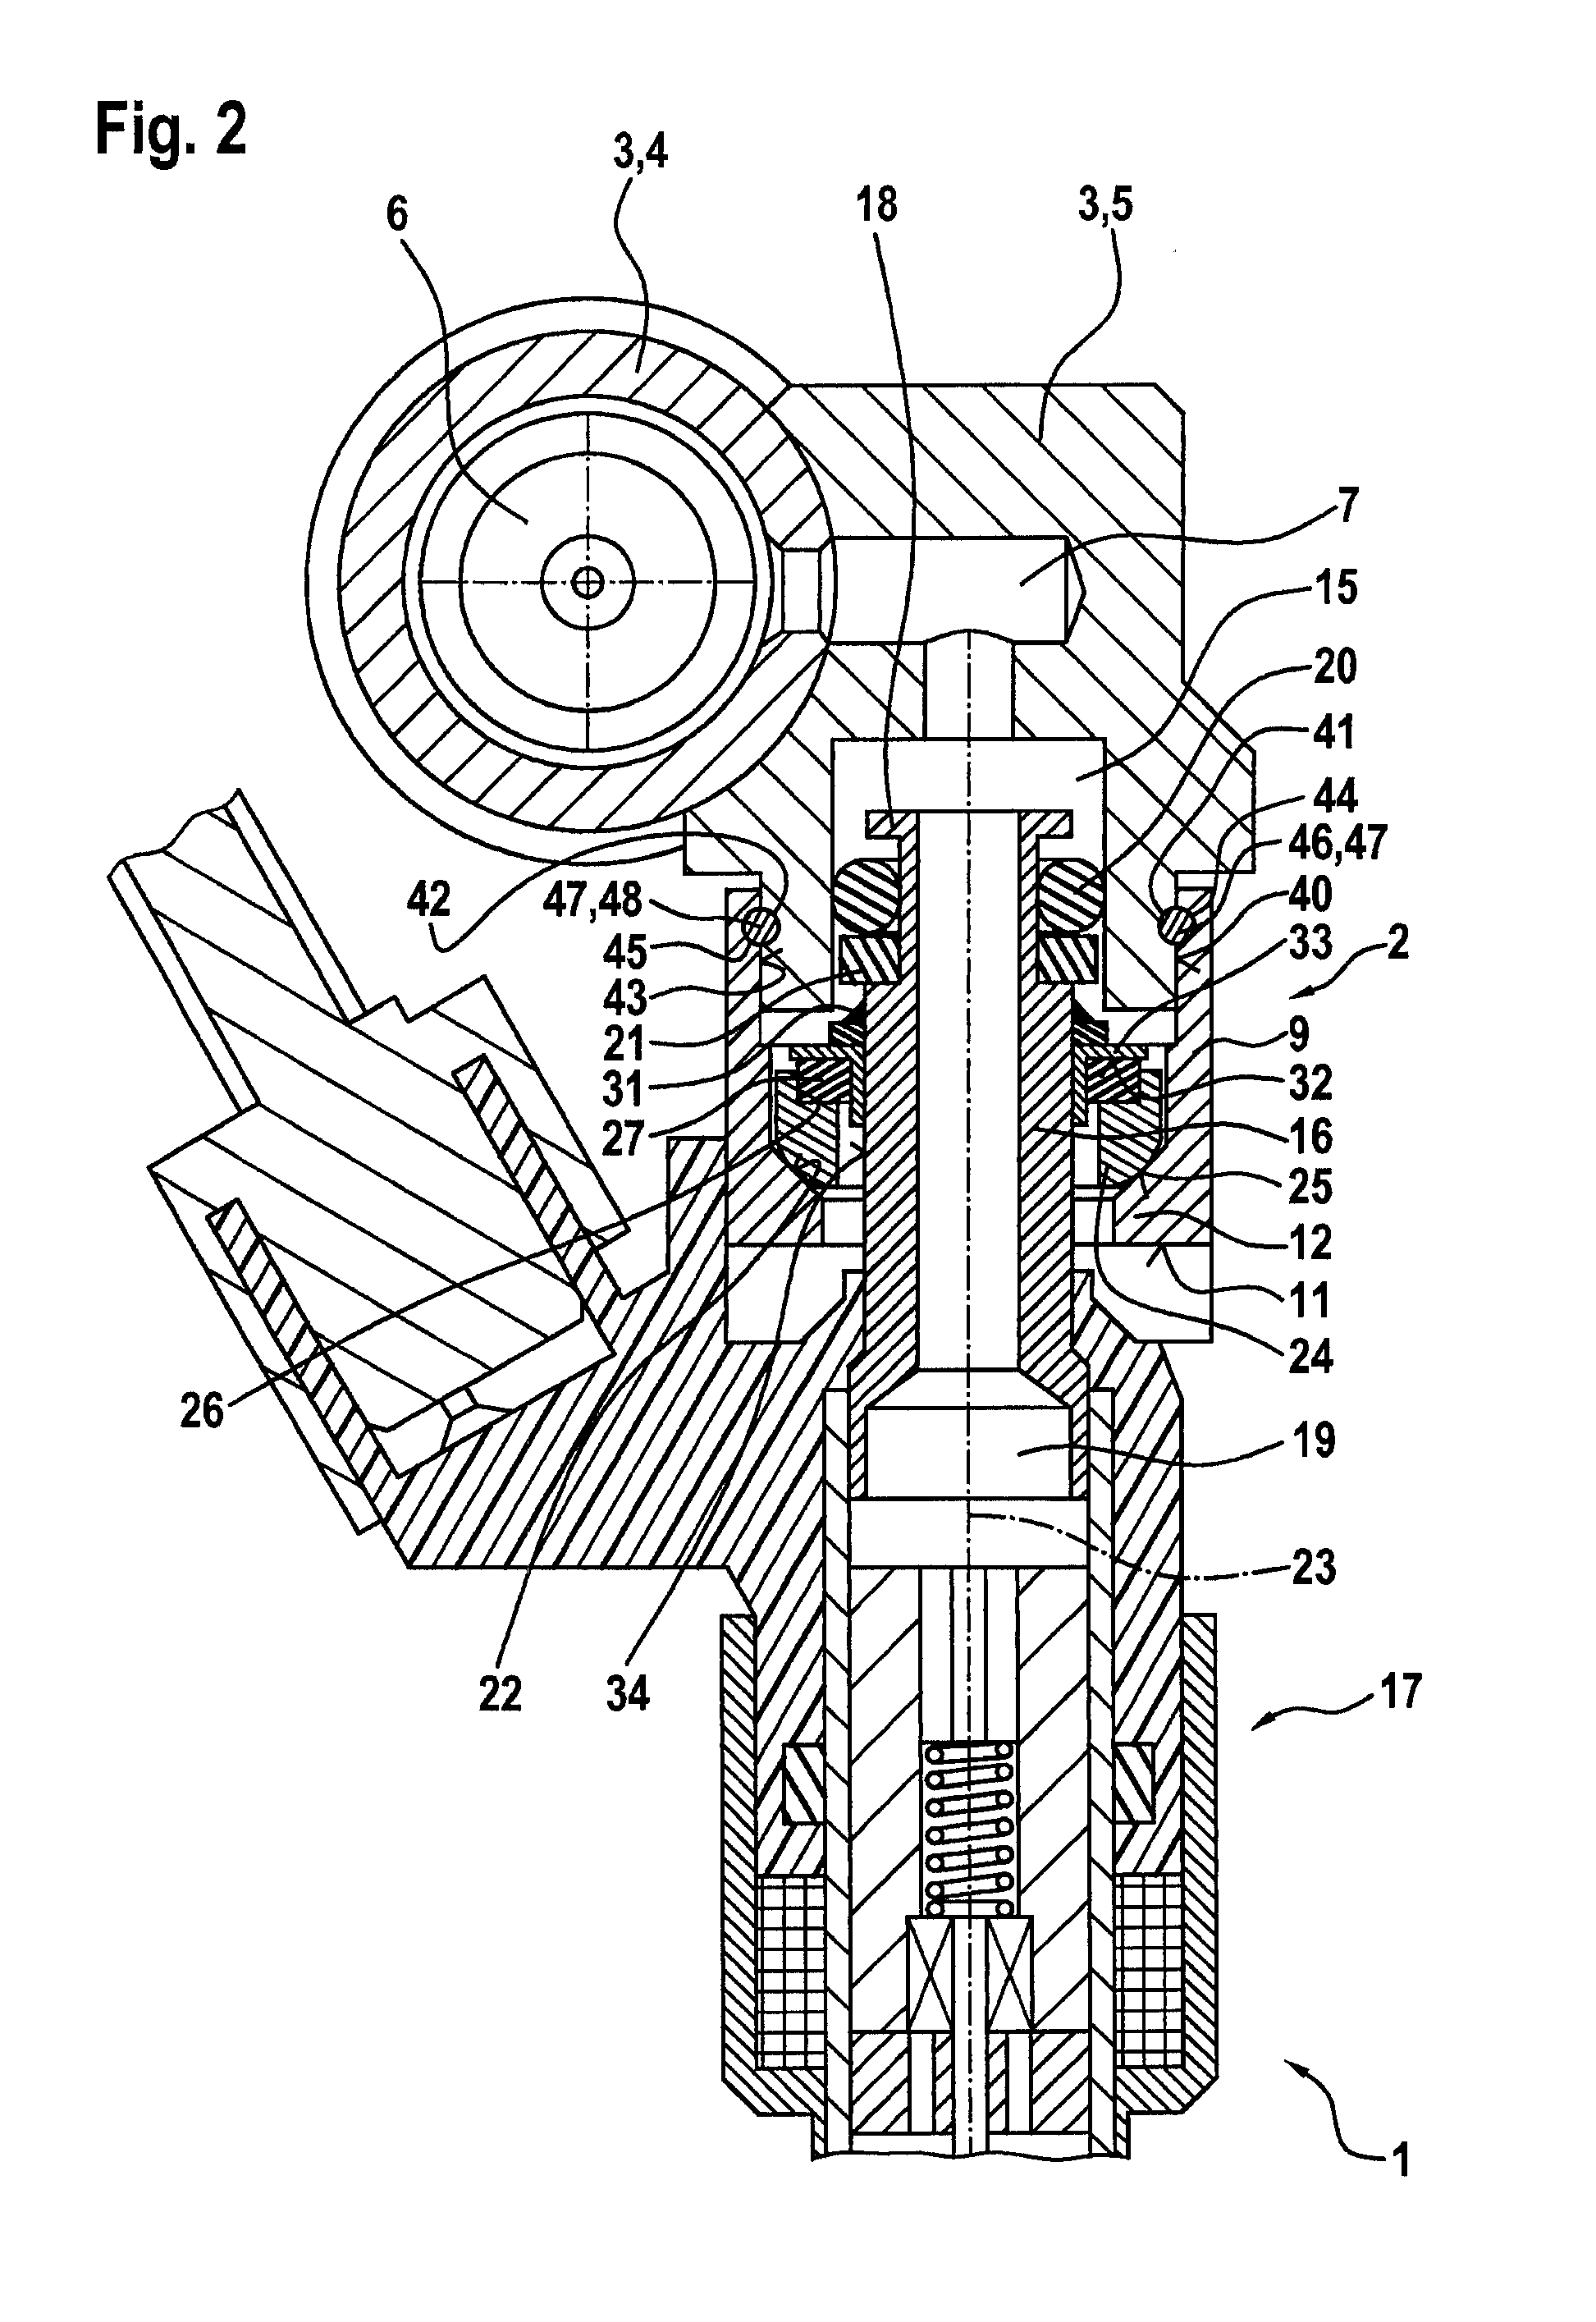 Fuel injection system comprising a fuel-guiding component, a fuel injection valve and a mounting